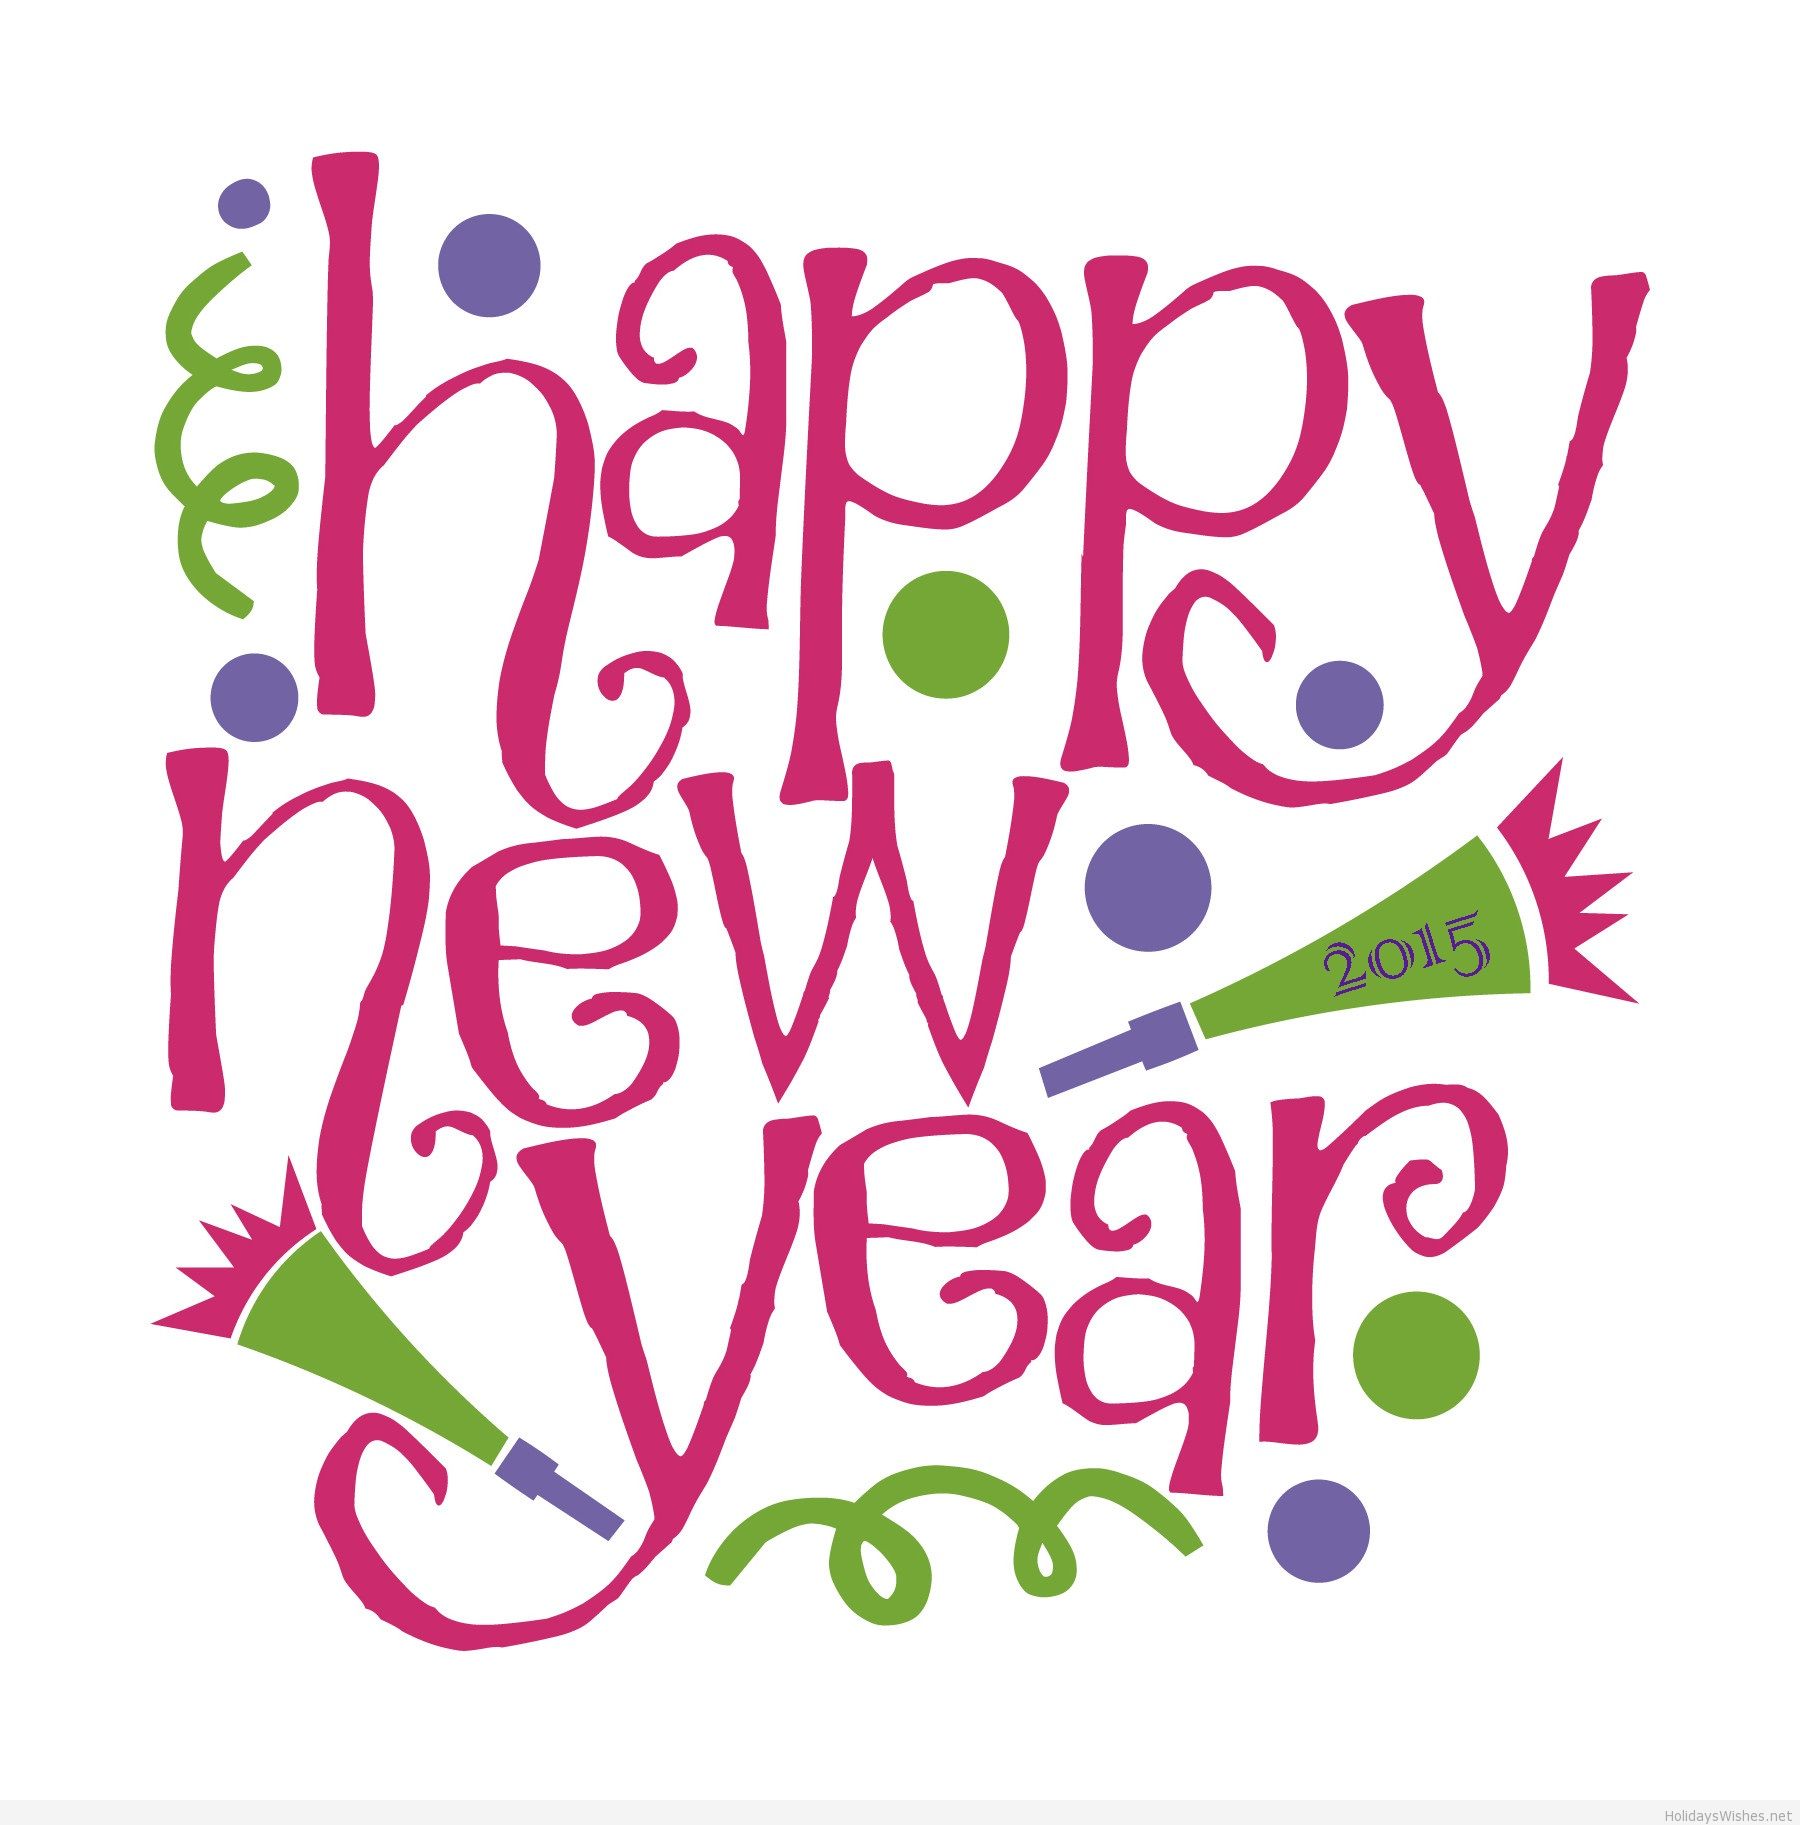 New year clipart free clipart